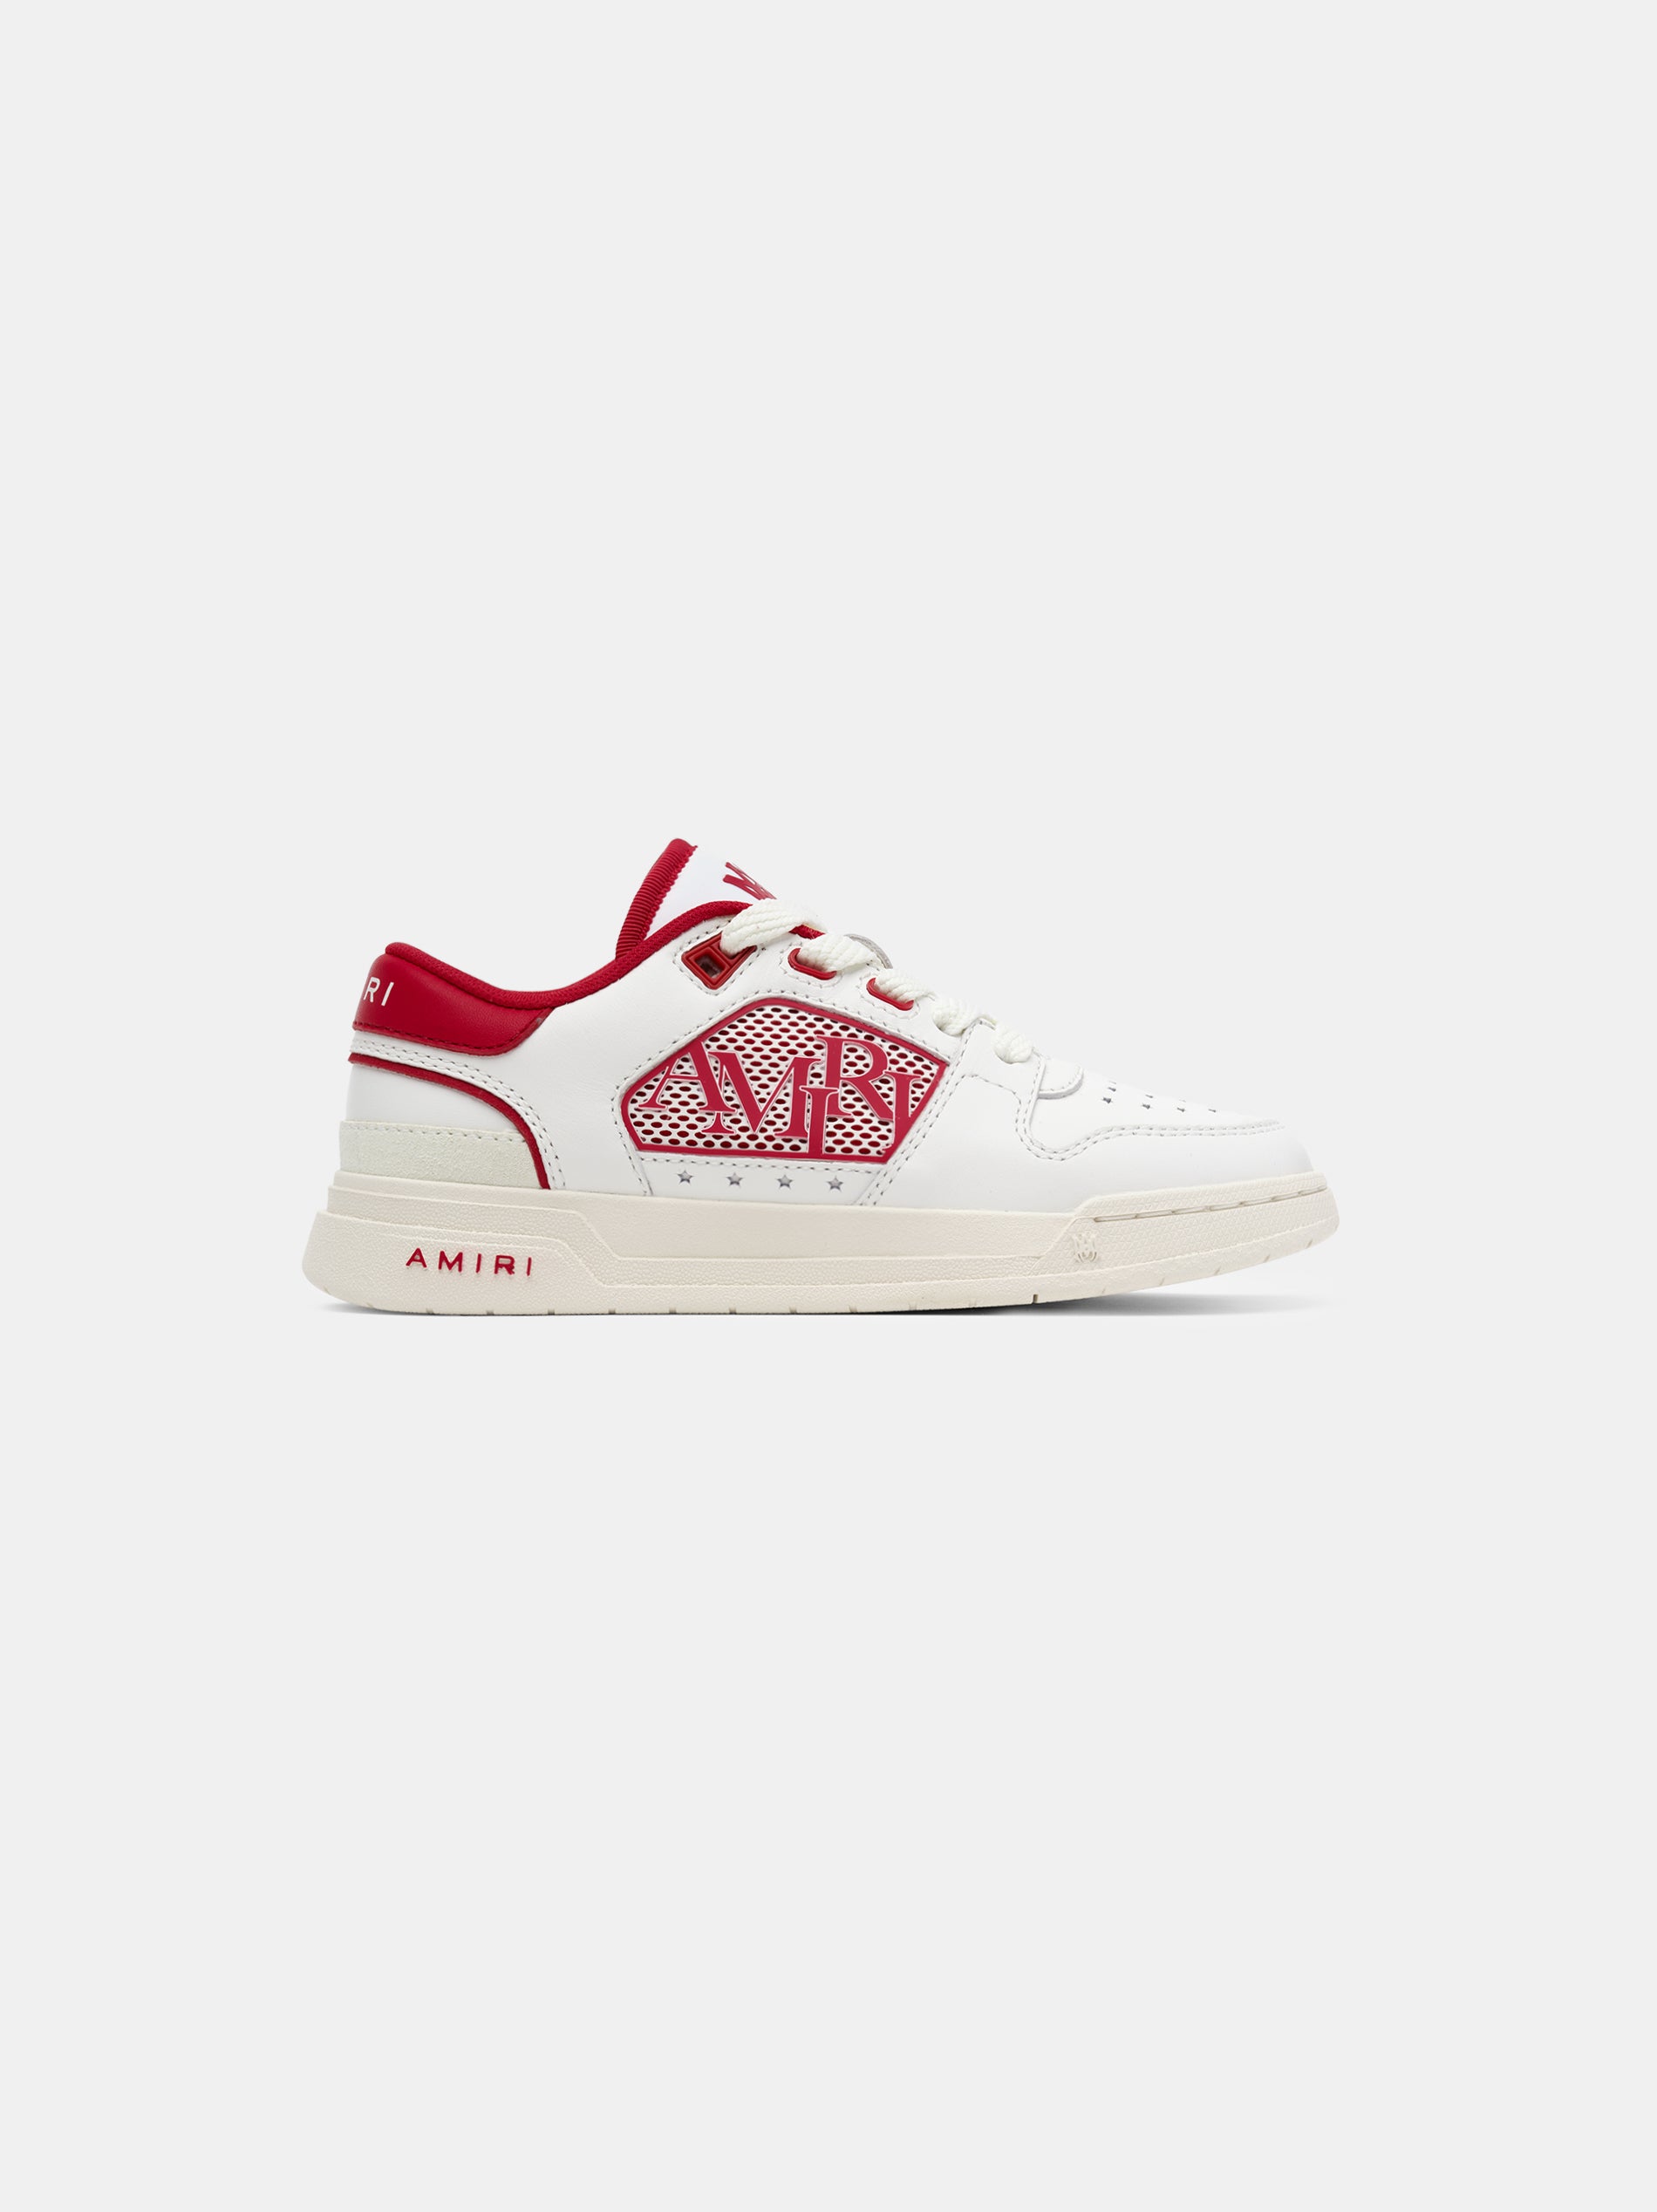 Product KIDS - KIDS' CLASSIC LOW - White Red featured image